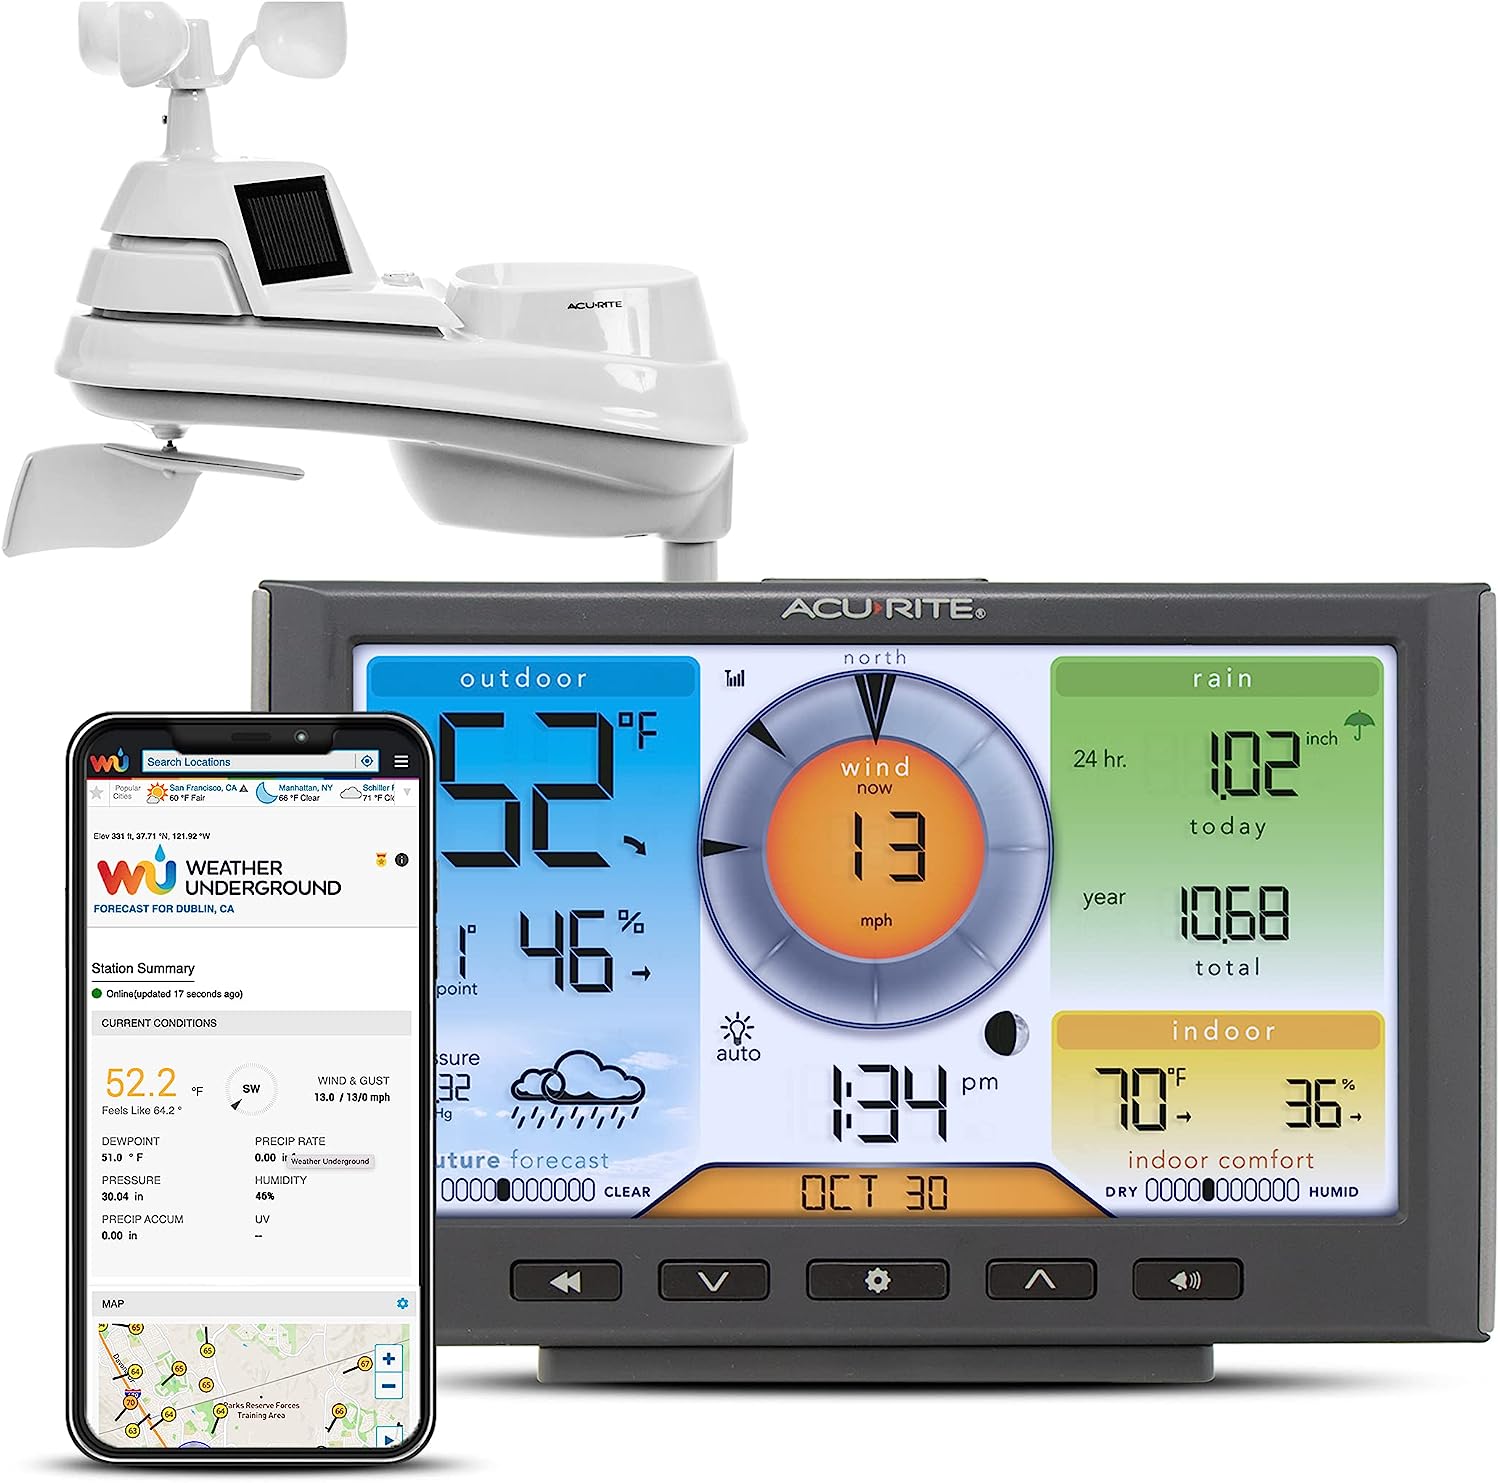 AcuRite Iris (5-in-1) Home Weather Station with Wi-Fi [...]